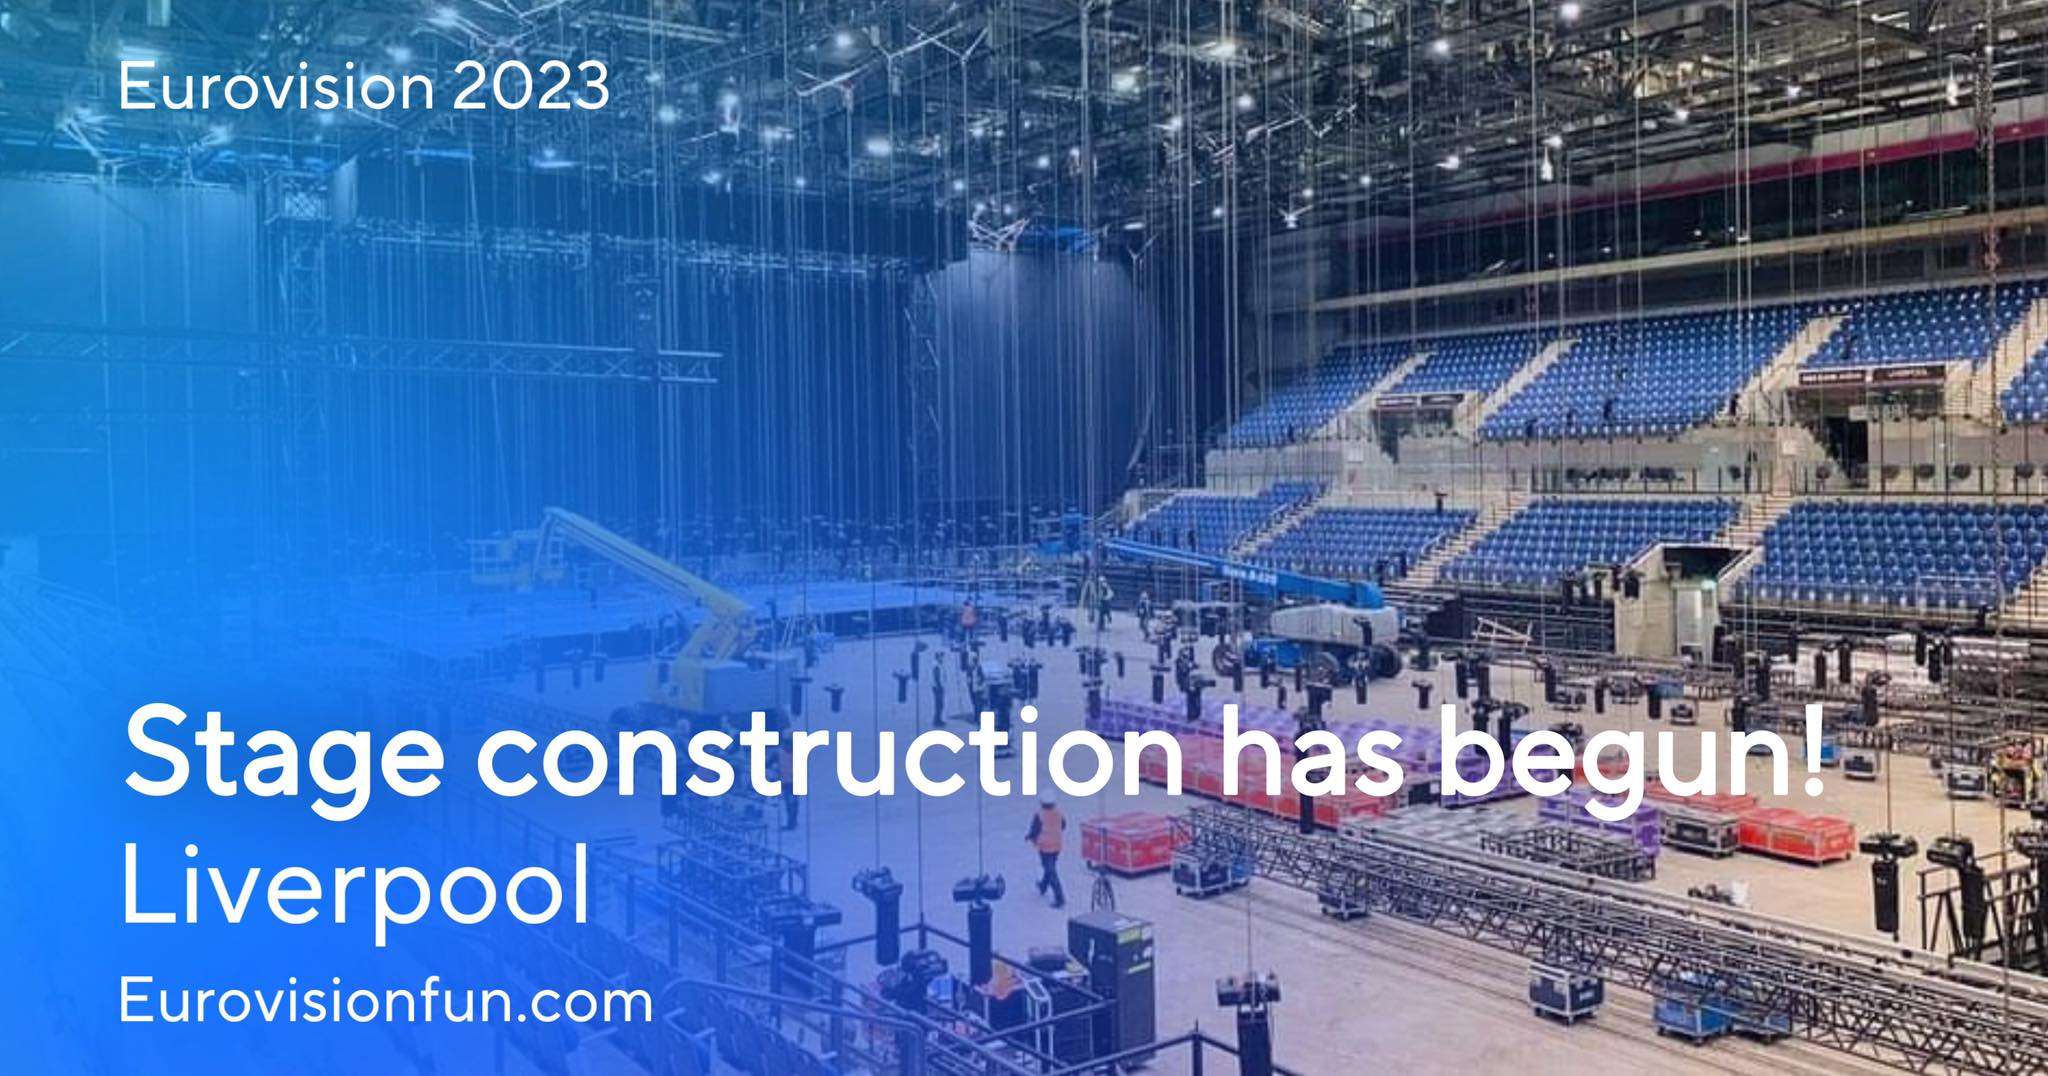 Eurovision 2023 Construction of the M&S Bank Arena stage has begun